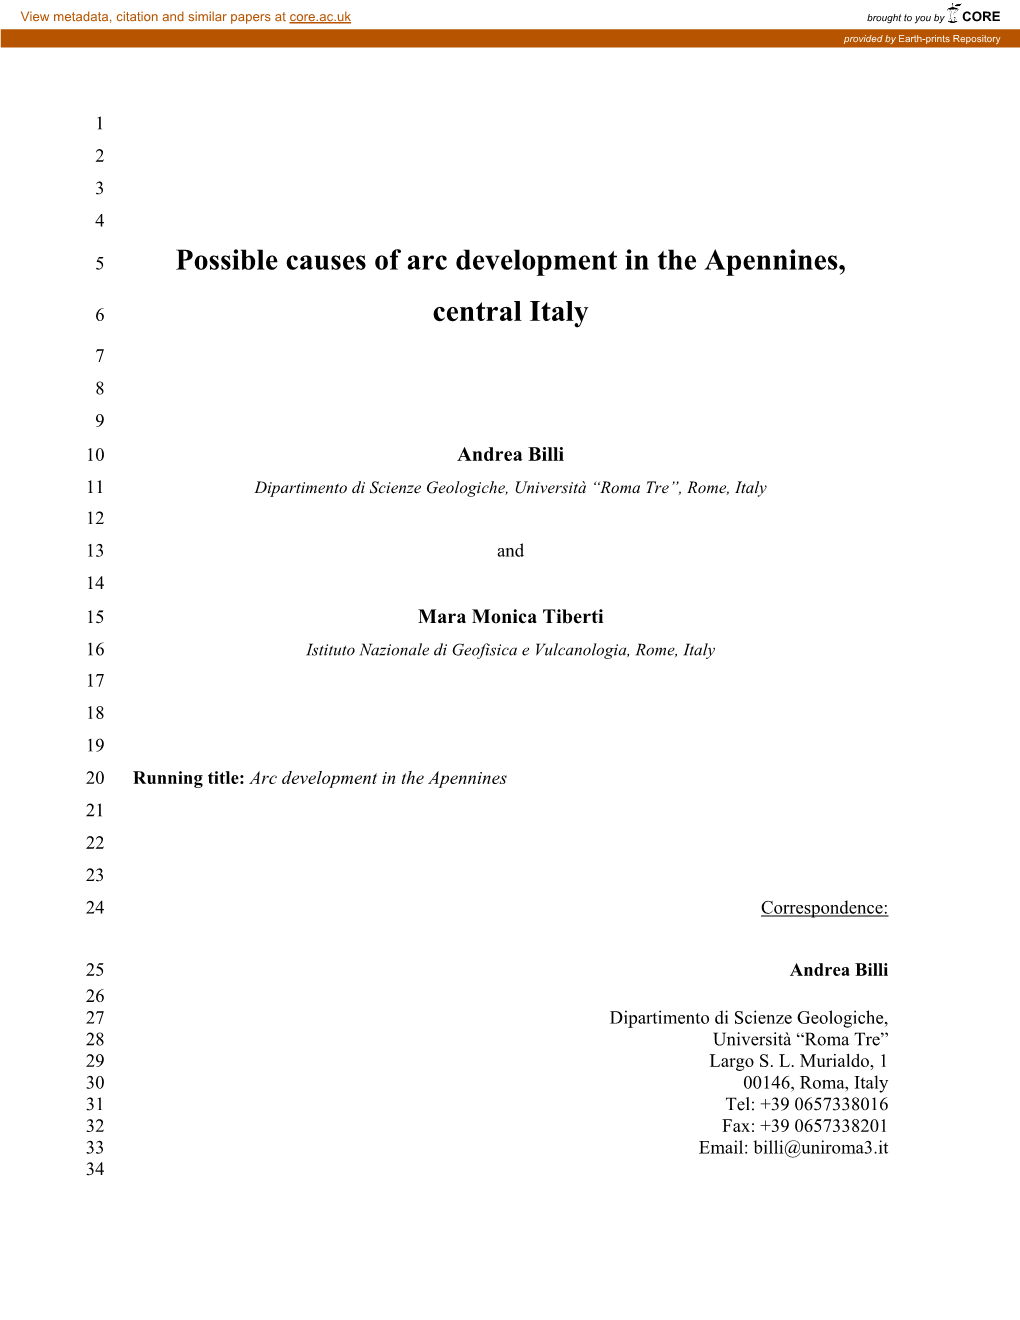 Possible Causes of Arc Development in the Apennines, Central Italy